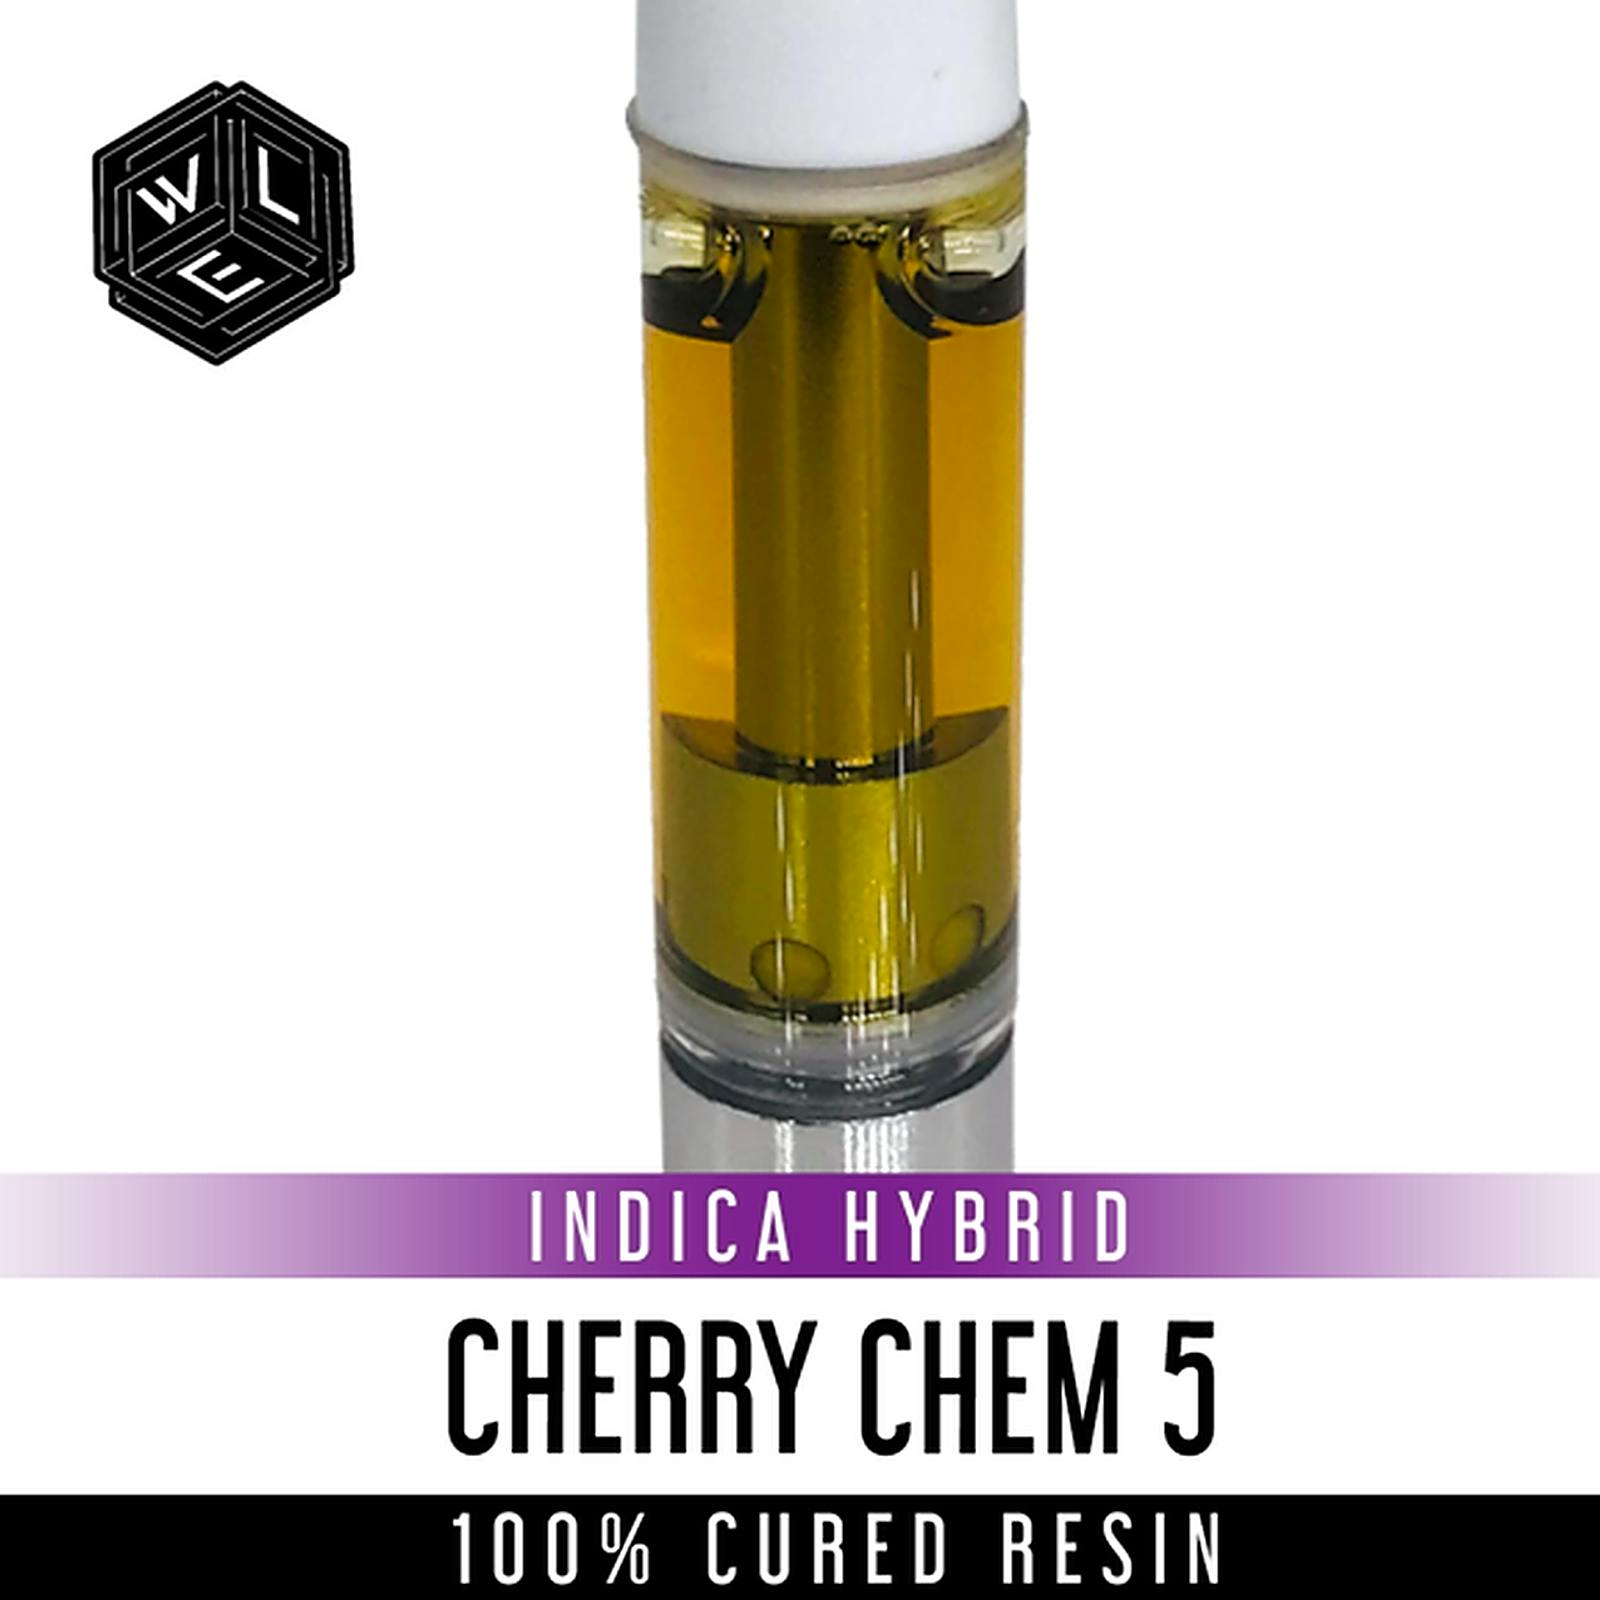 White Label Extracts Cherry Chem 5 100 Cured Resin Cartridge 1g Leafly 2435